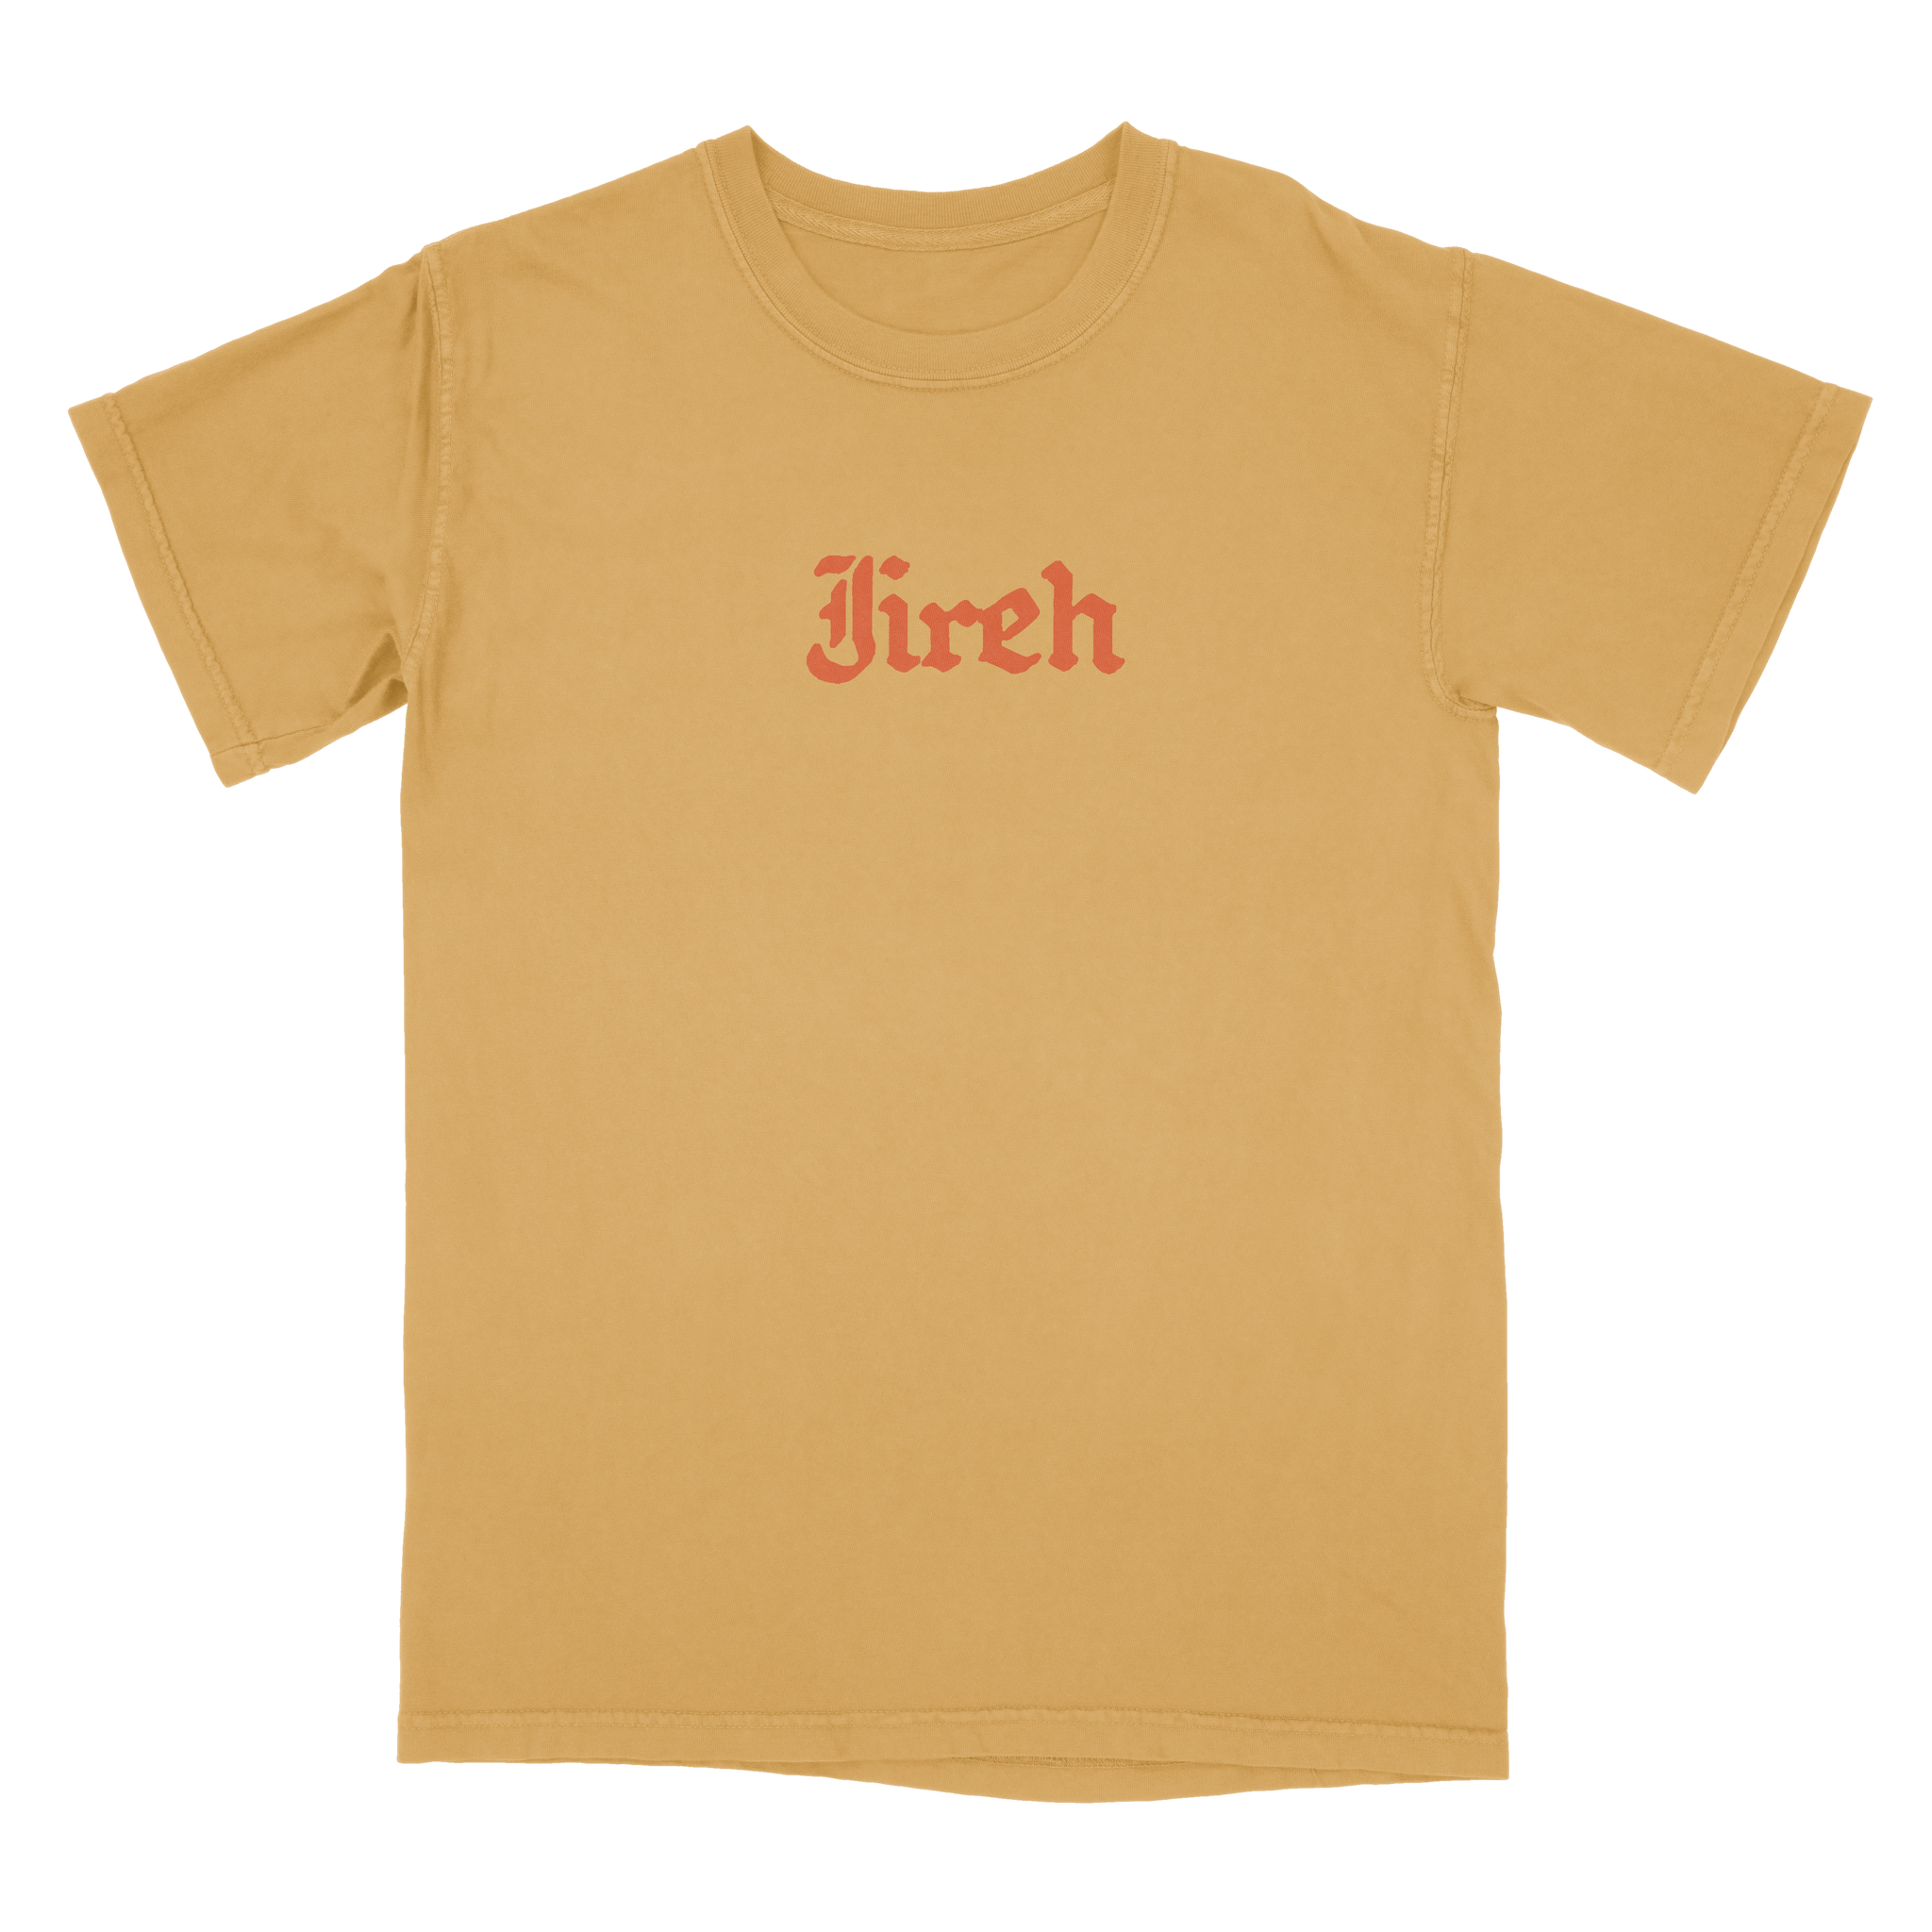 Flatlay - Mustard shirt with the word Jireh on the front.